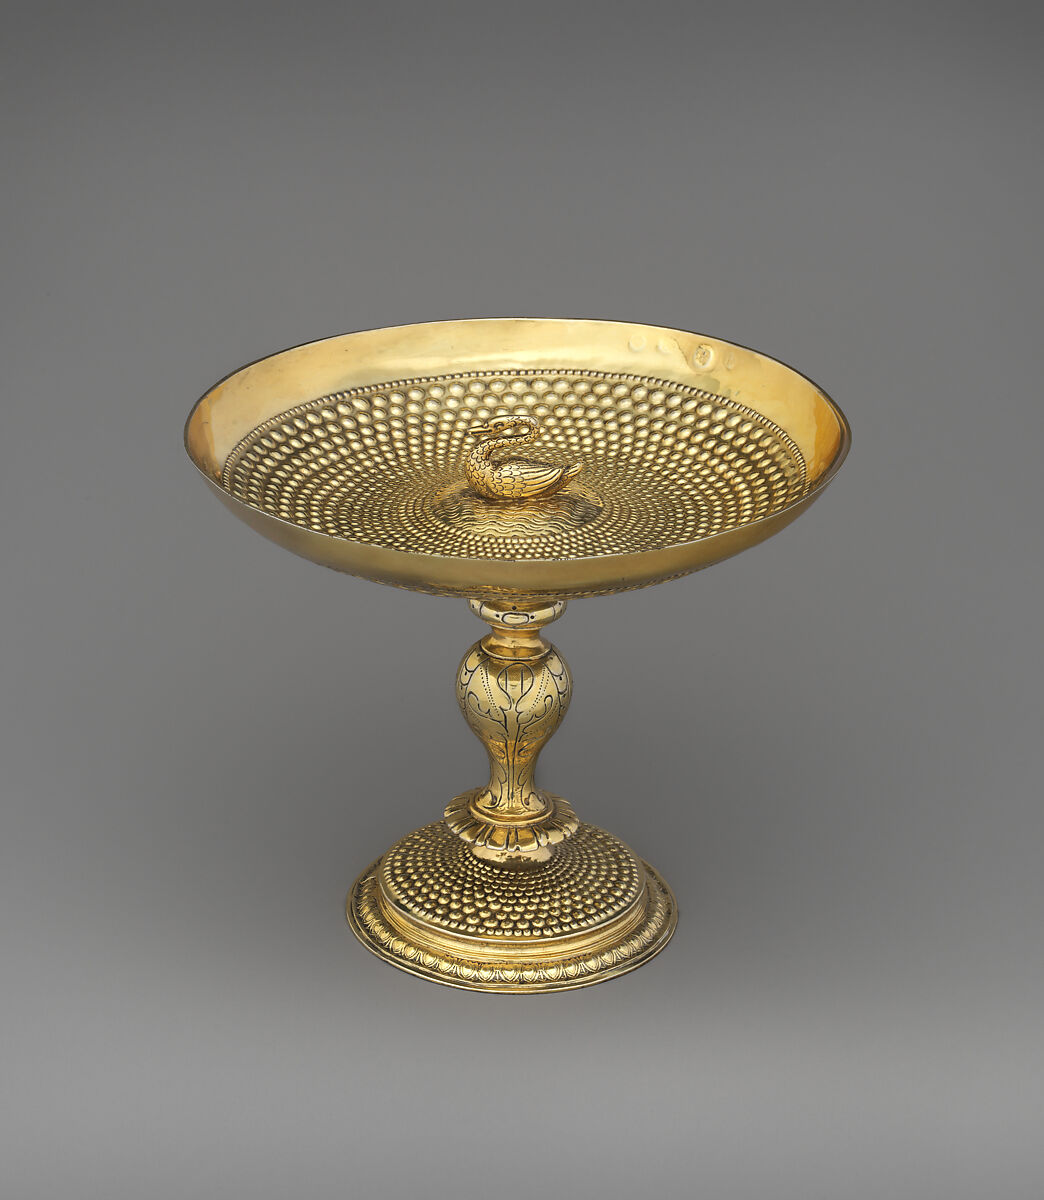 Wine Cup on a High Foot (Tazza), Gilded silver